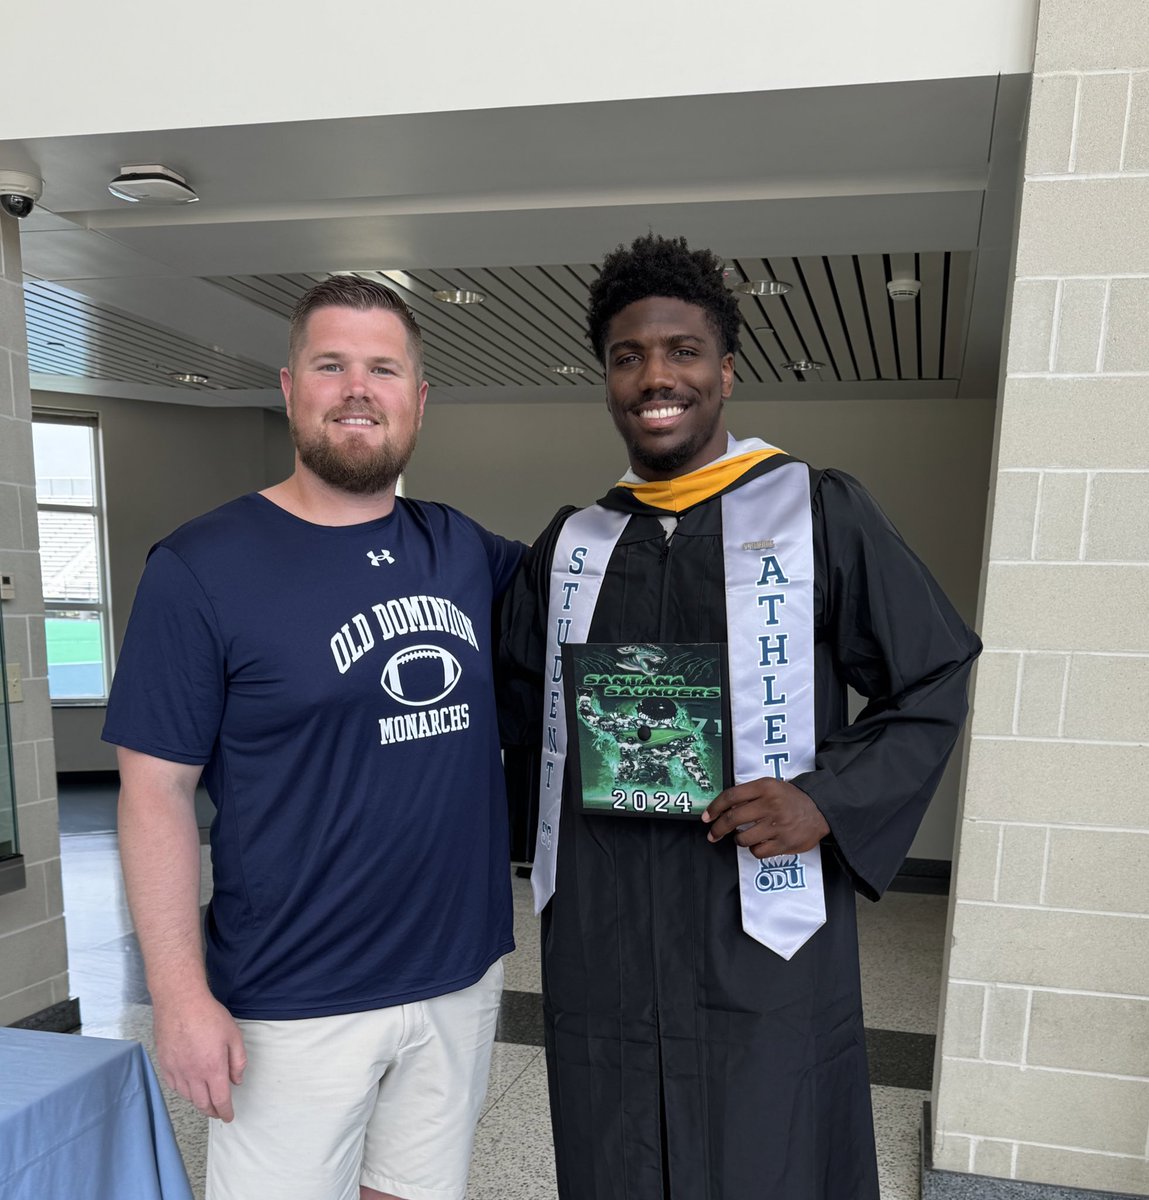 Congrats @SS71__ excited for your future and congrats to all the other @ODUFootball graduating today!